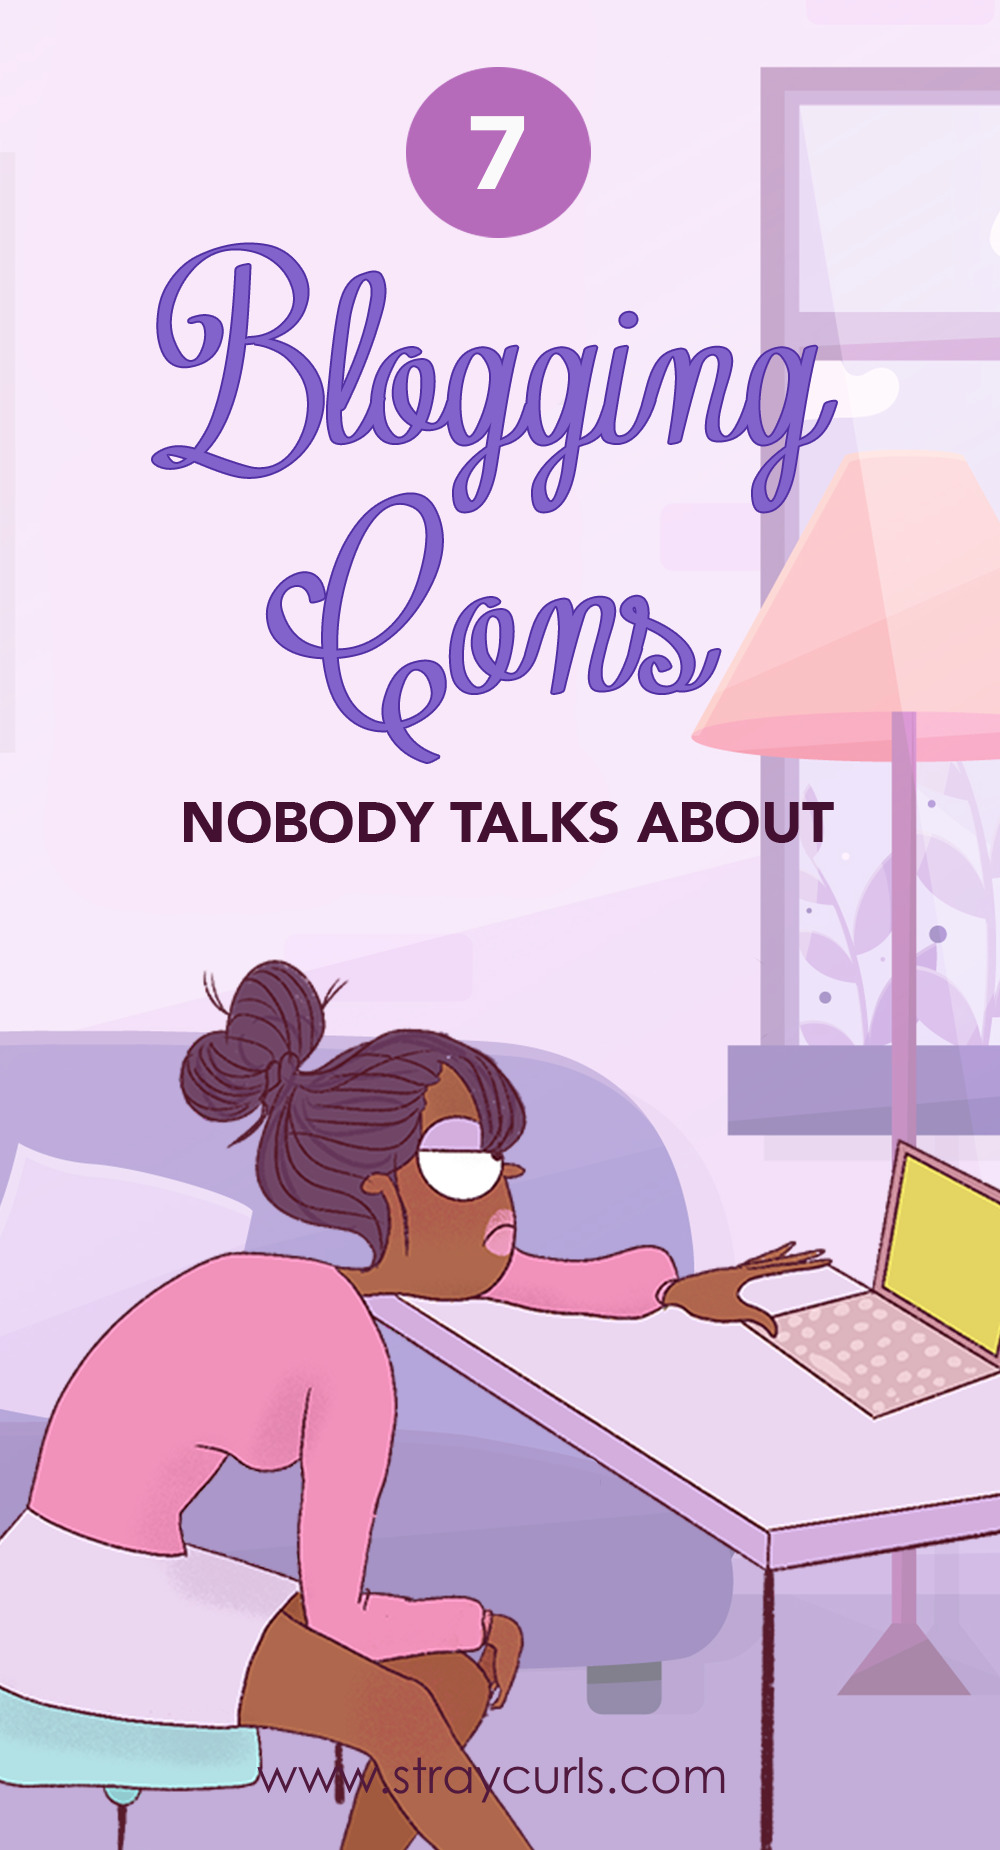 blogging cons, cons about blogging nobody talks about